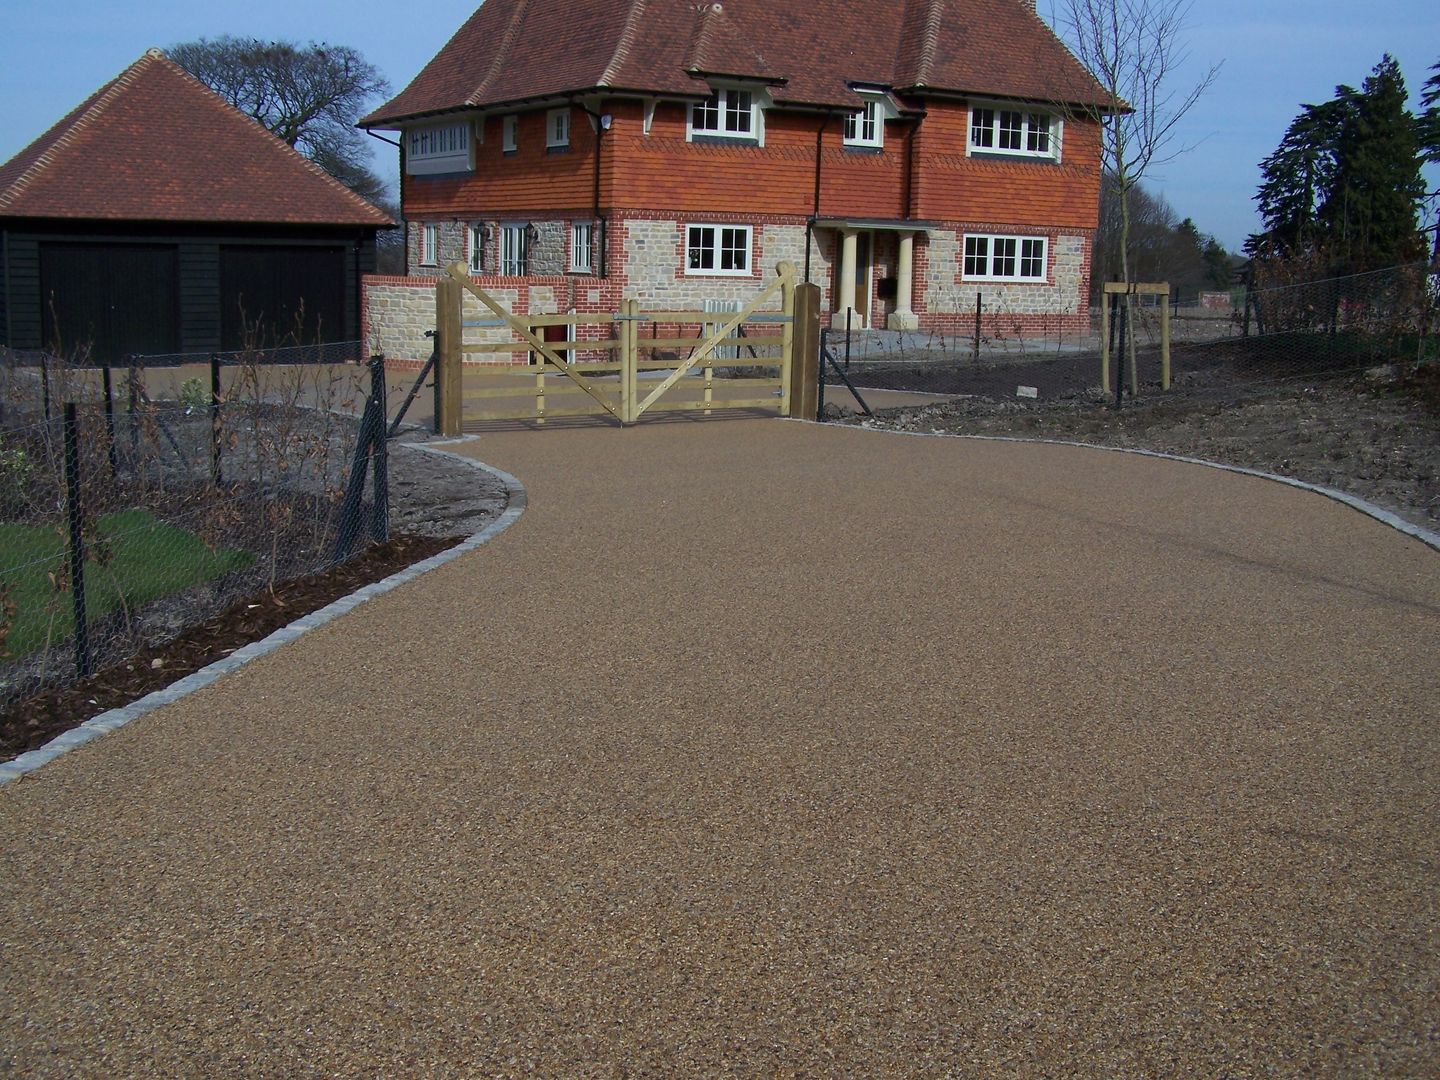 Domestic Driveways installation of resin bound paving, Permeable Paving Solutions UK Permeable Paving Solutions UK Rustikale Wände & Böden